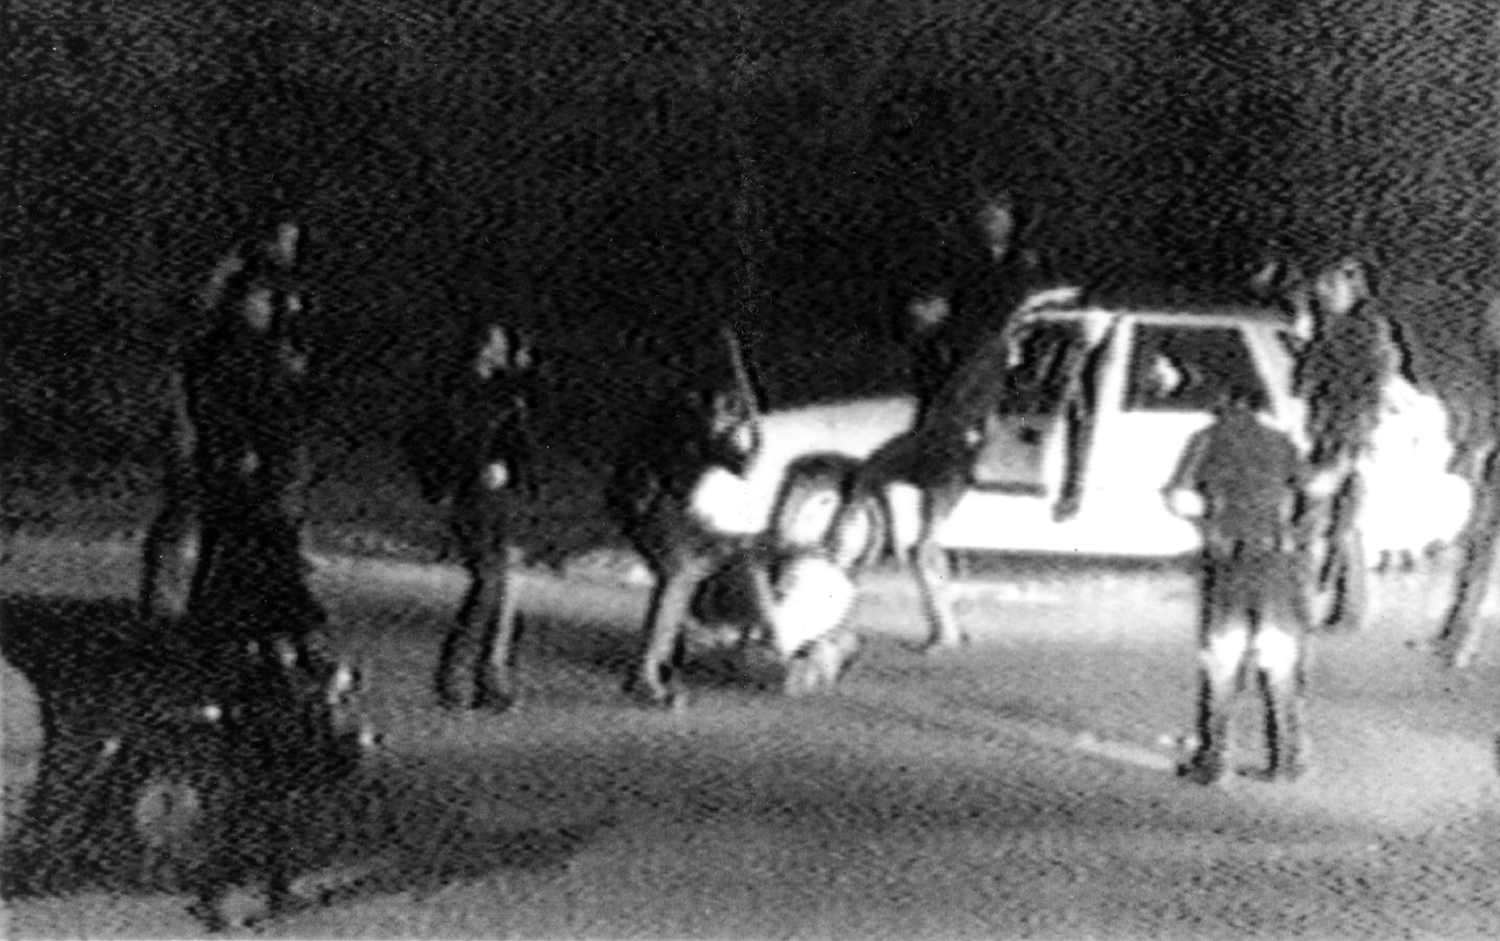 Video tape shot by George Holliday shows what appears to be a group of police officers beating Rodney King with nightsticks and kicking him as other officers look on. Los Angeles. United States. March 3, 1991.